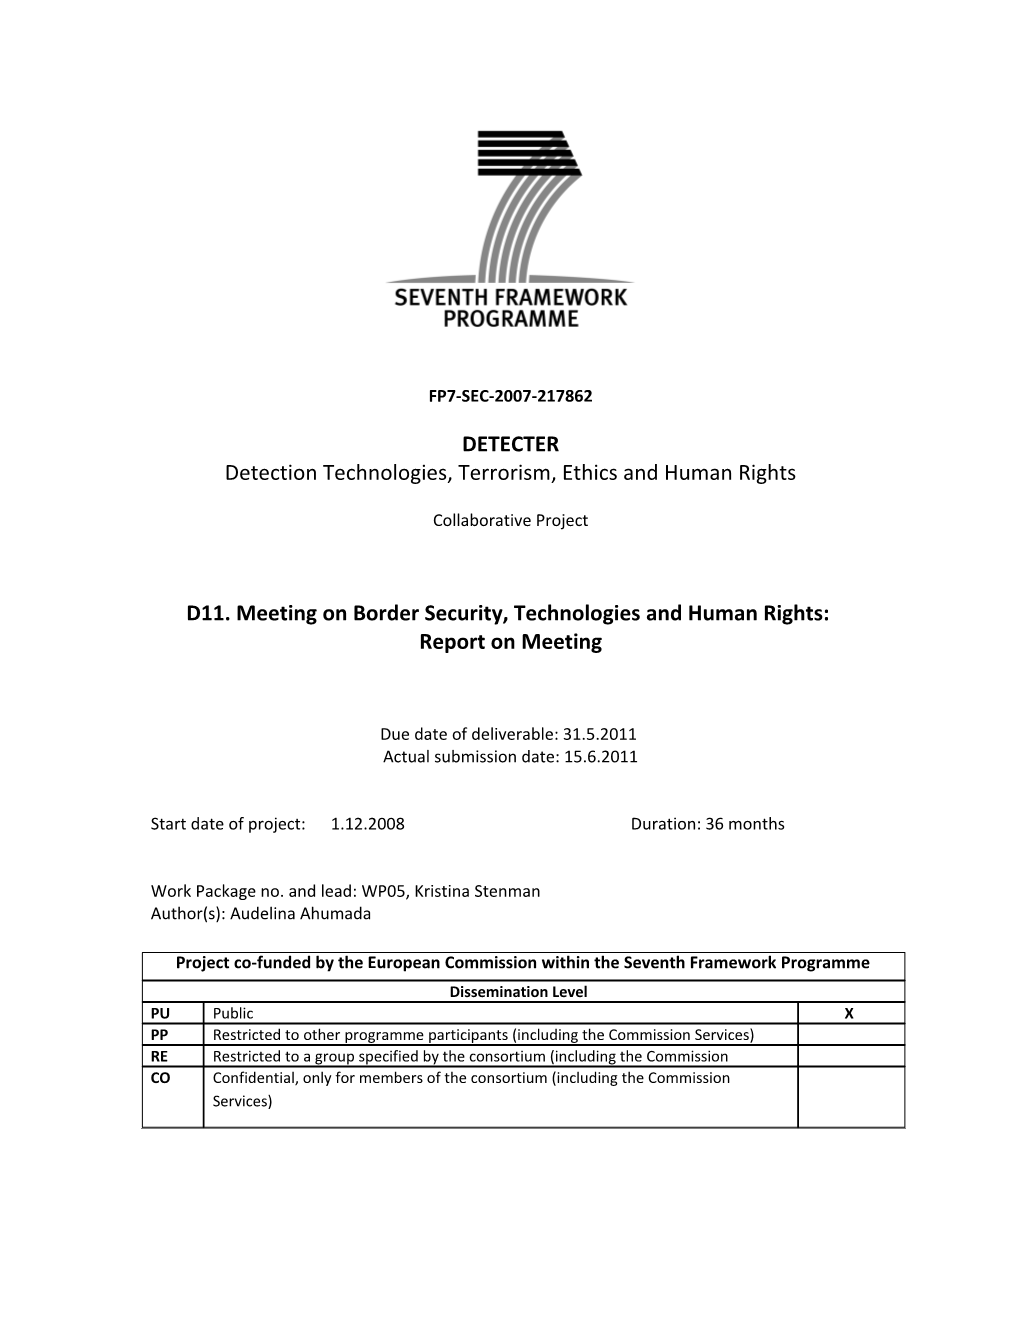 Detection Technologies, Terrorism, Ethics and Human Rights s1